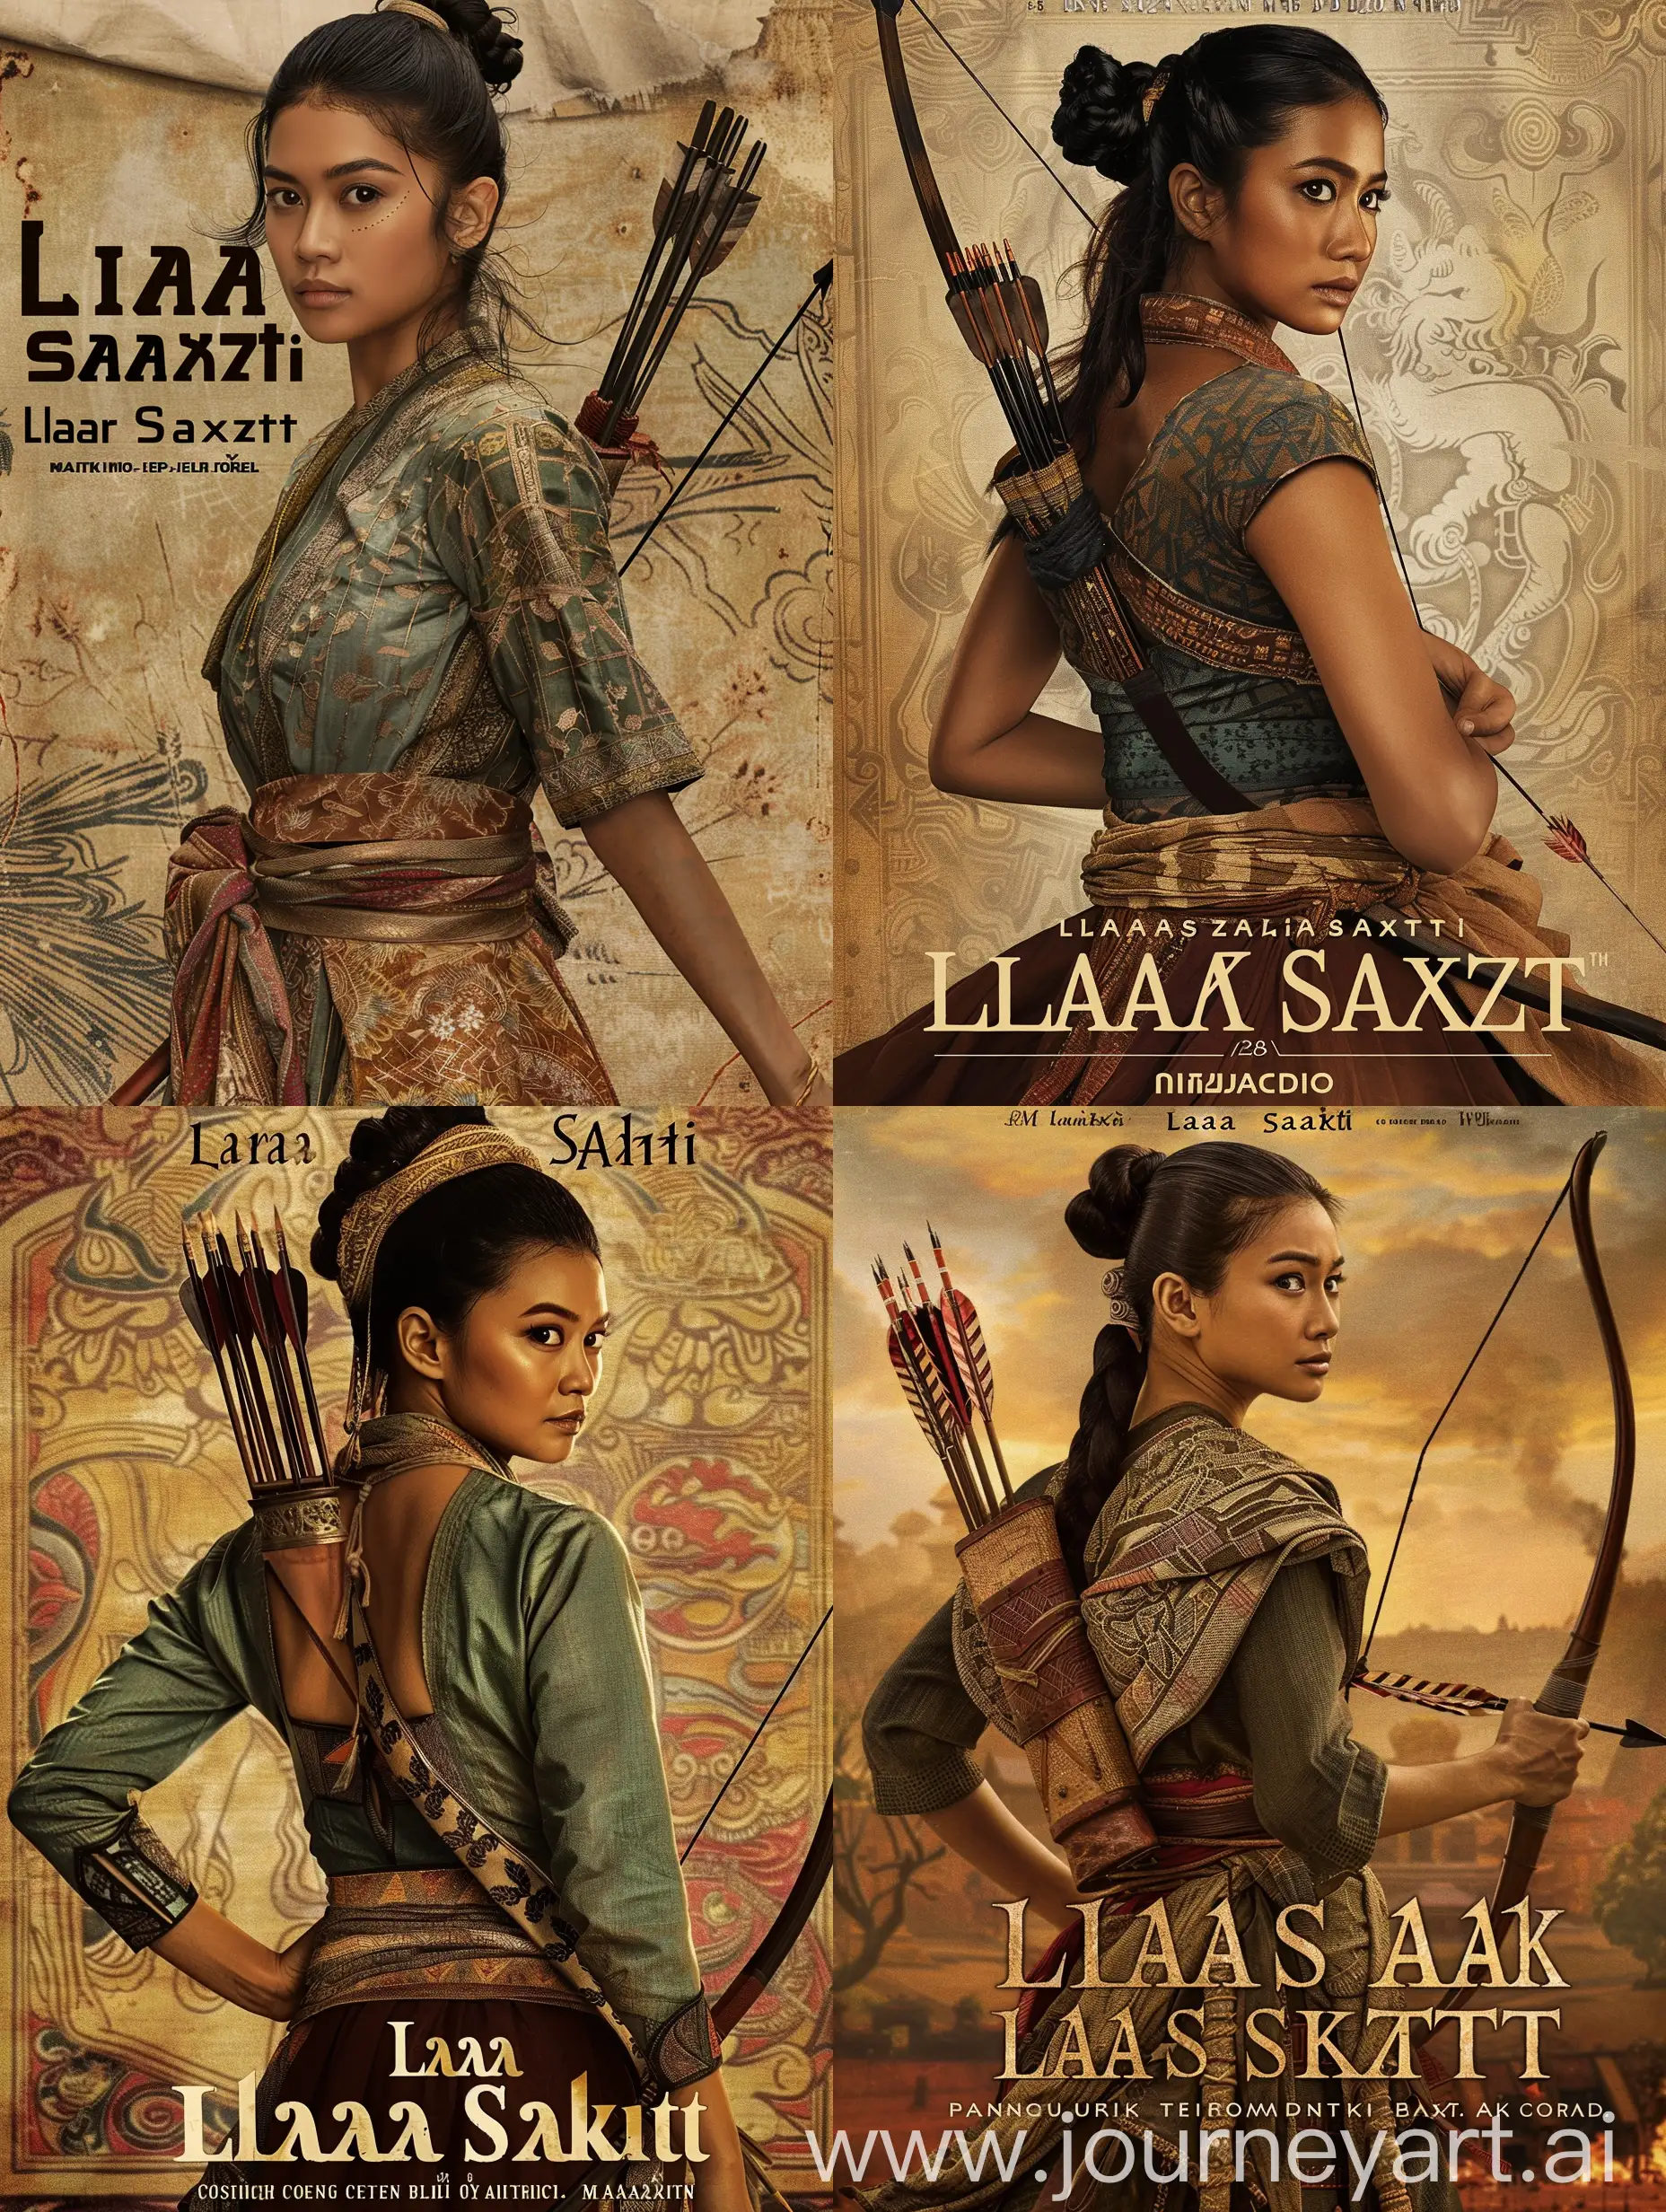 movie poster with the text "Lara Sakti", actor like the Indonesian version of Lara Croft style, a woman, 28 years old, Javanese face, long black hair tied in a bun, sharp brown eyes, and brown skin, she is wearing a Majapahit cultural dress, wearing batik cloth tied around the waist as a belt, and typical Majapahit sarong trousers which allow free movement. On his back, there is an arrow, he is holding a bow, background of the Majapahit kingdom